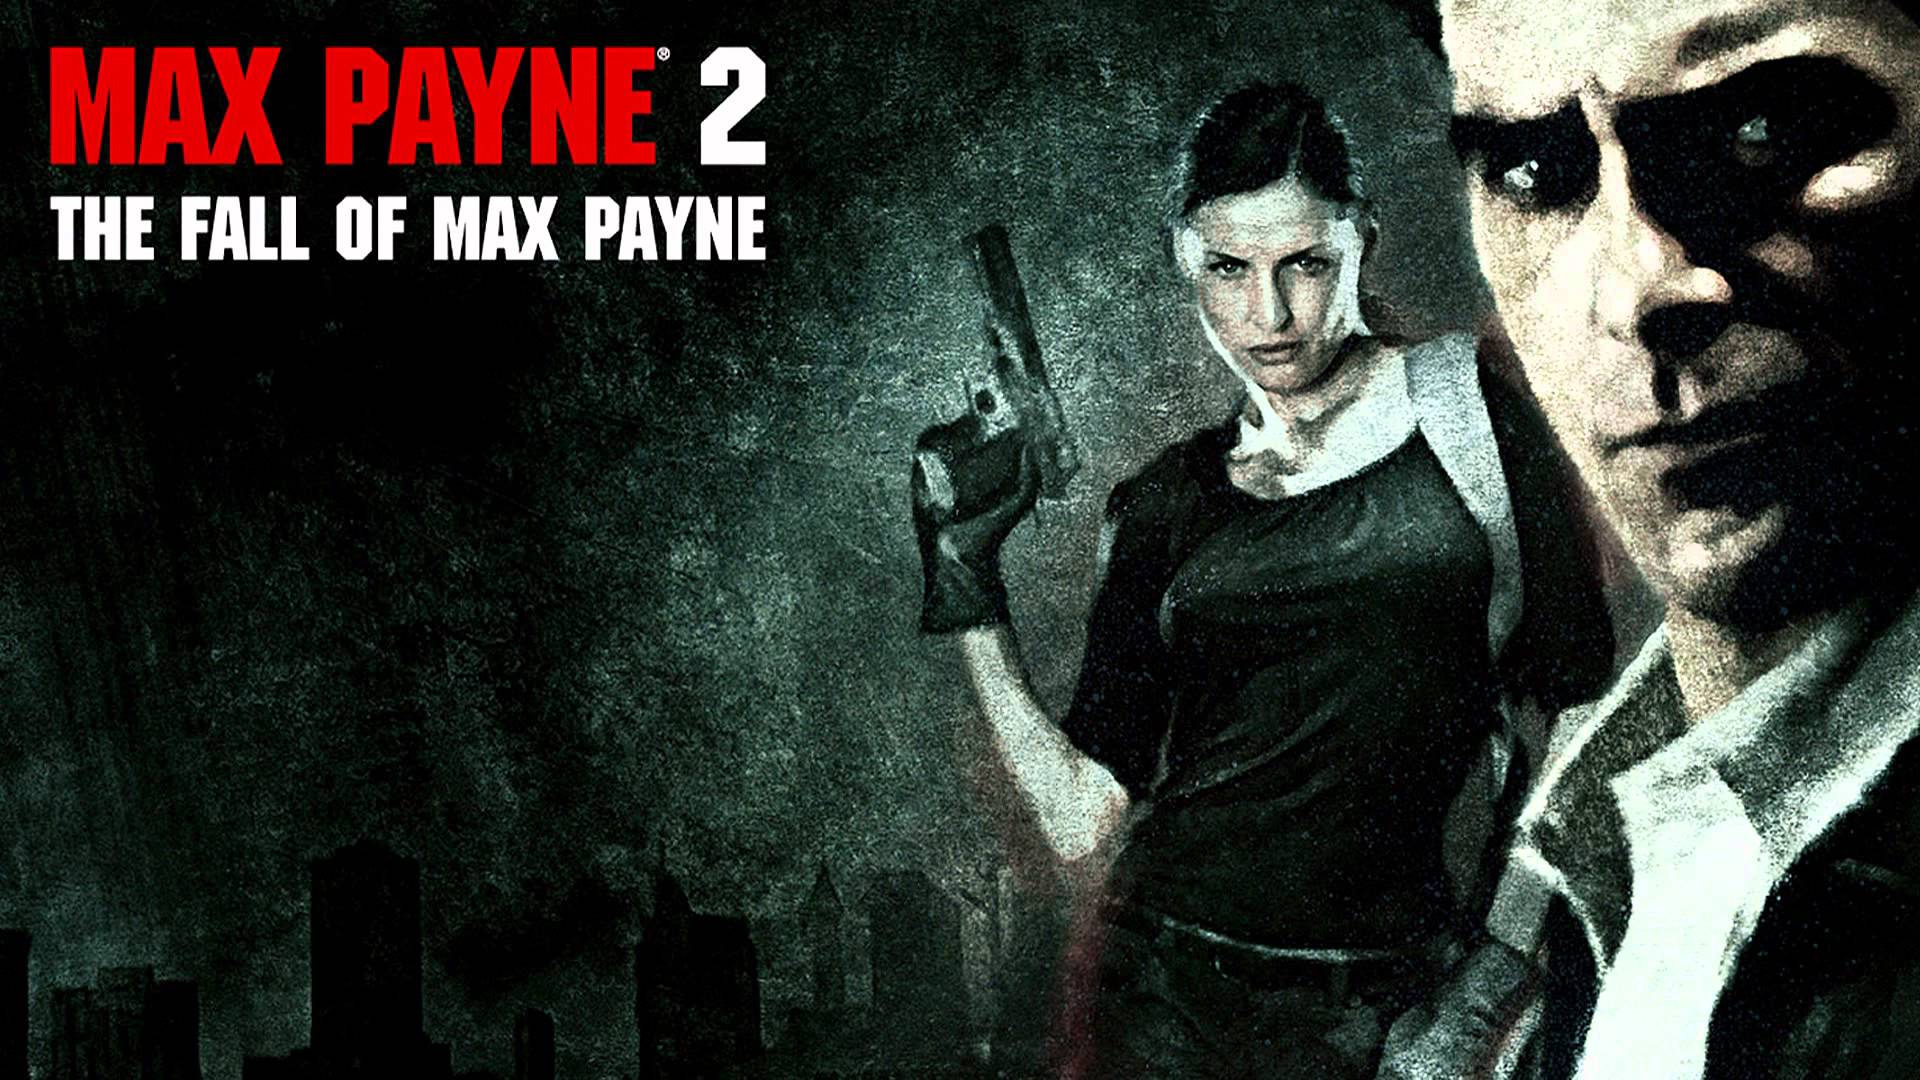 18-years-later-max-payne-2-is-still-an-amazing-game